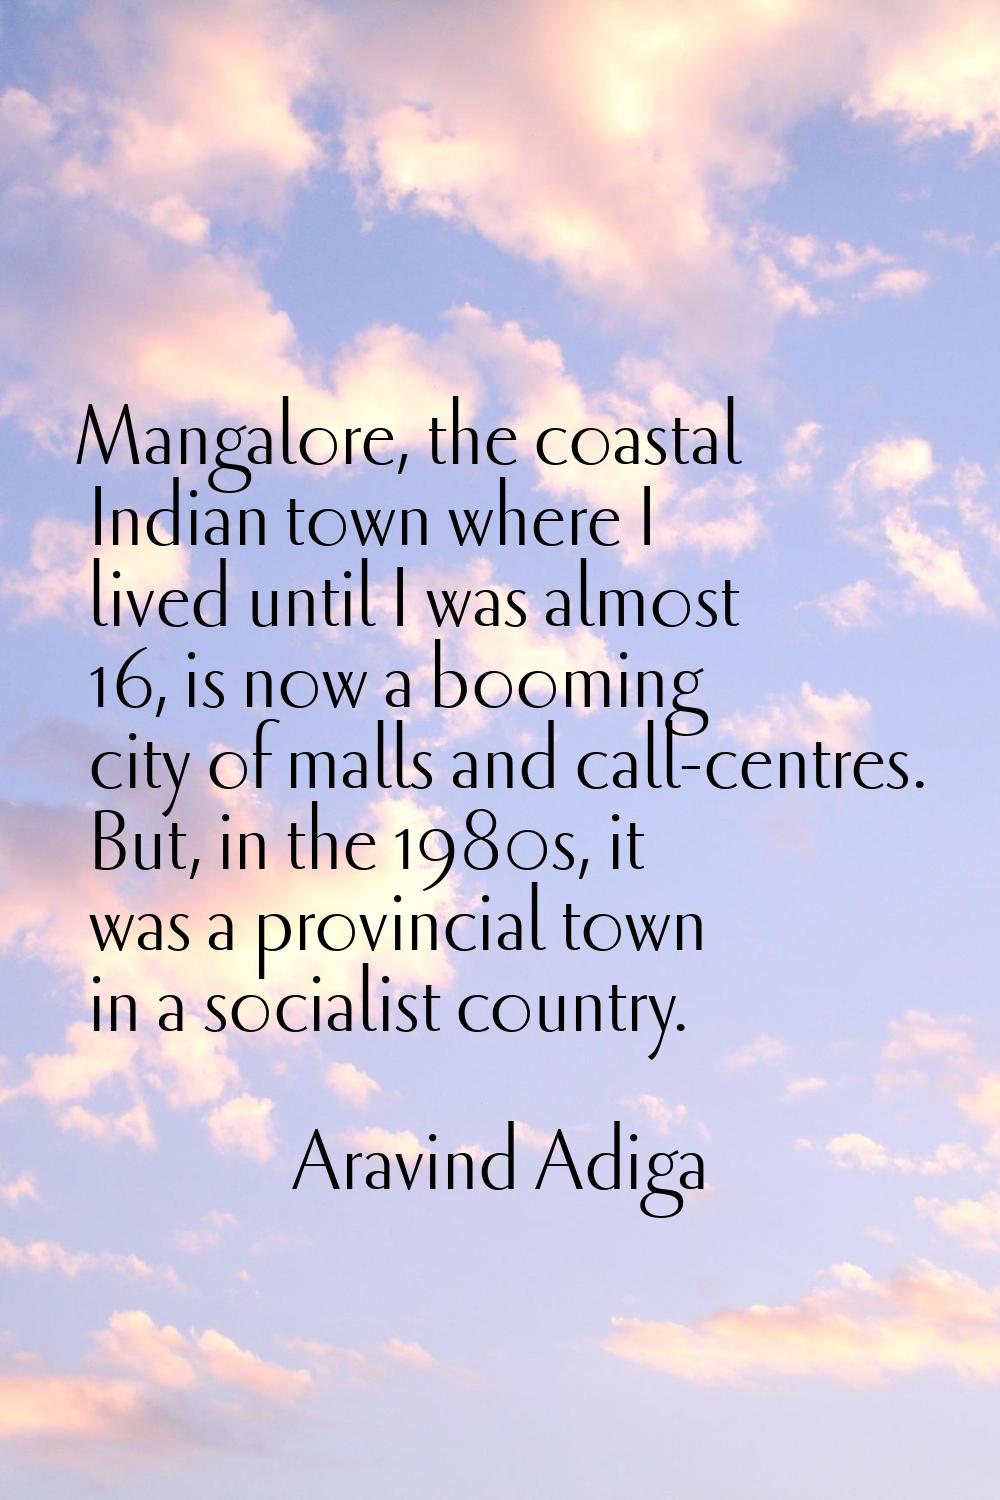 Mangalore, the coastal Indian town where I lived until I was almost 16, is now a booming city of ma